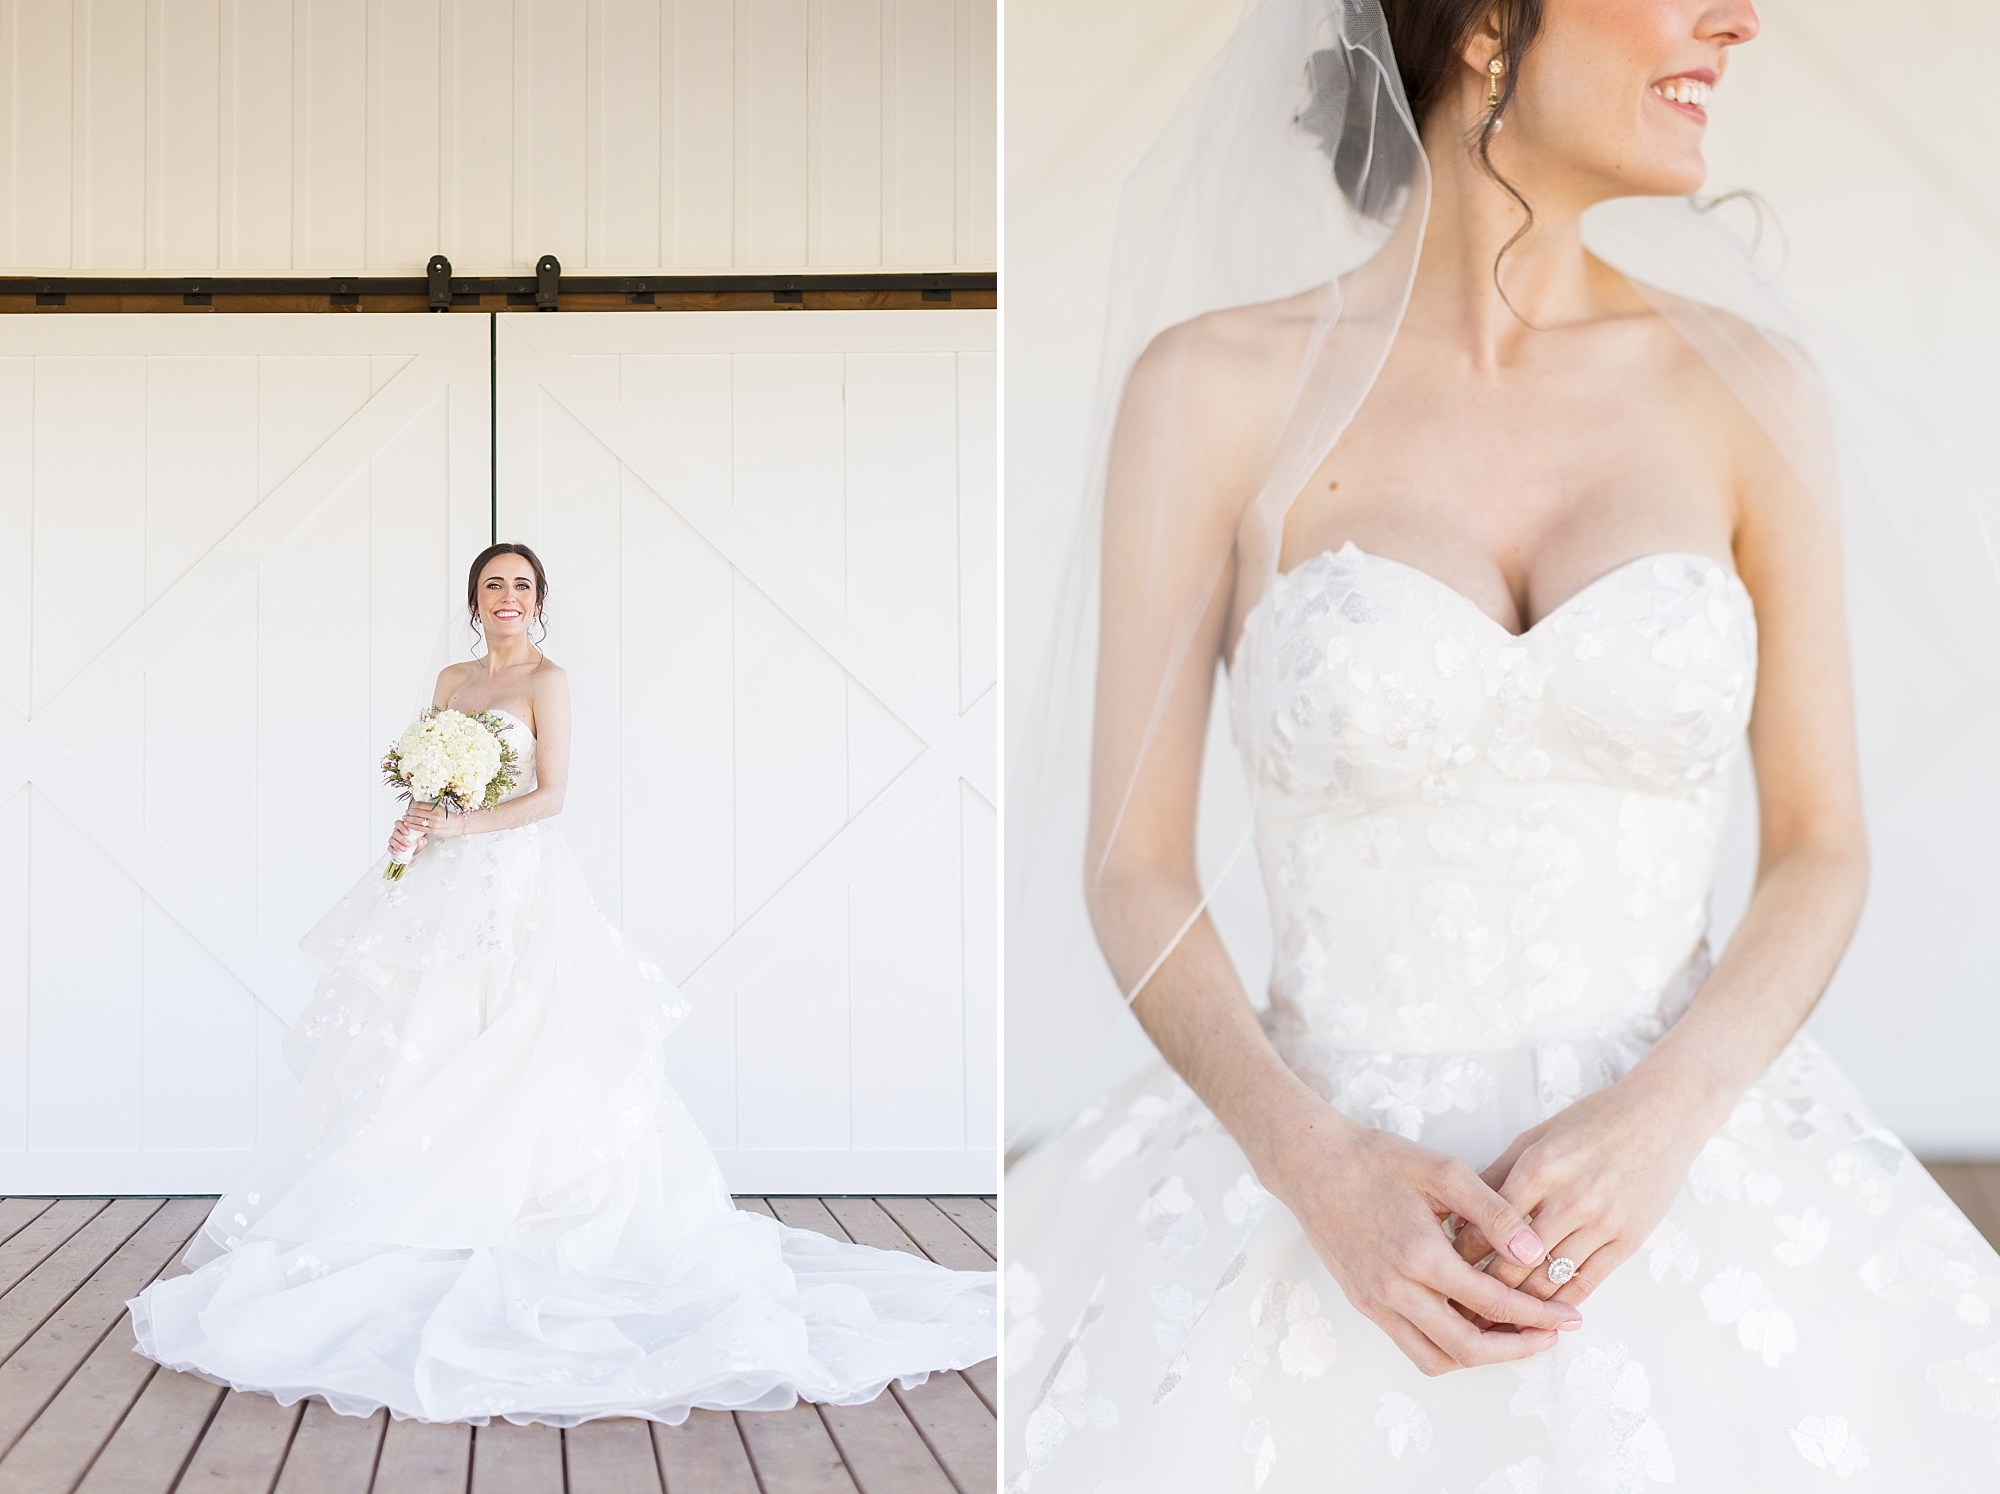 Bridal portraits in an elegant ballgown at Southern Grace Farms in Angier | Raleigh Wedding Photographer